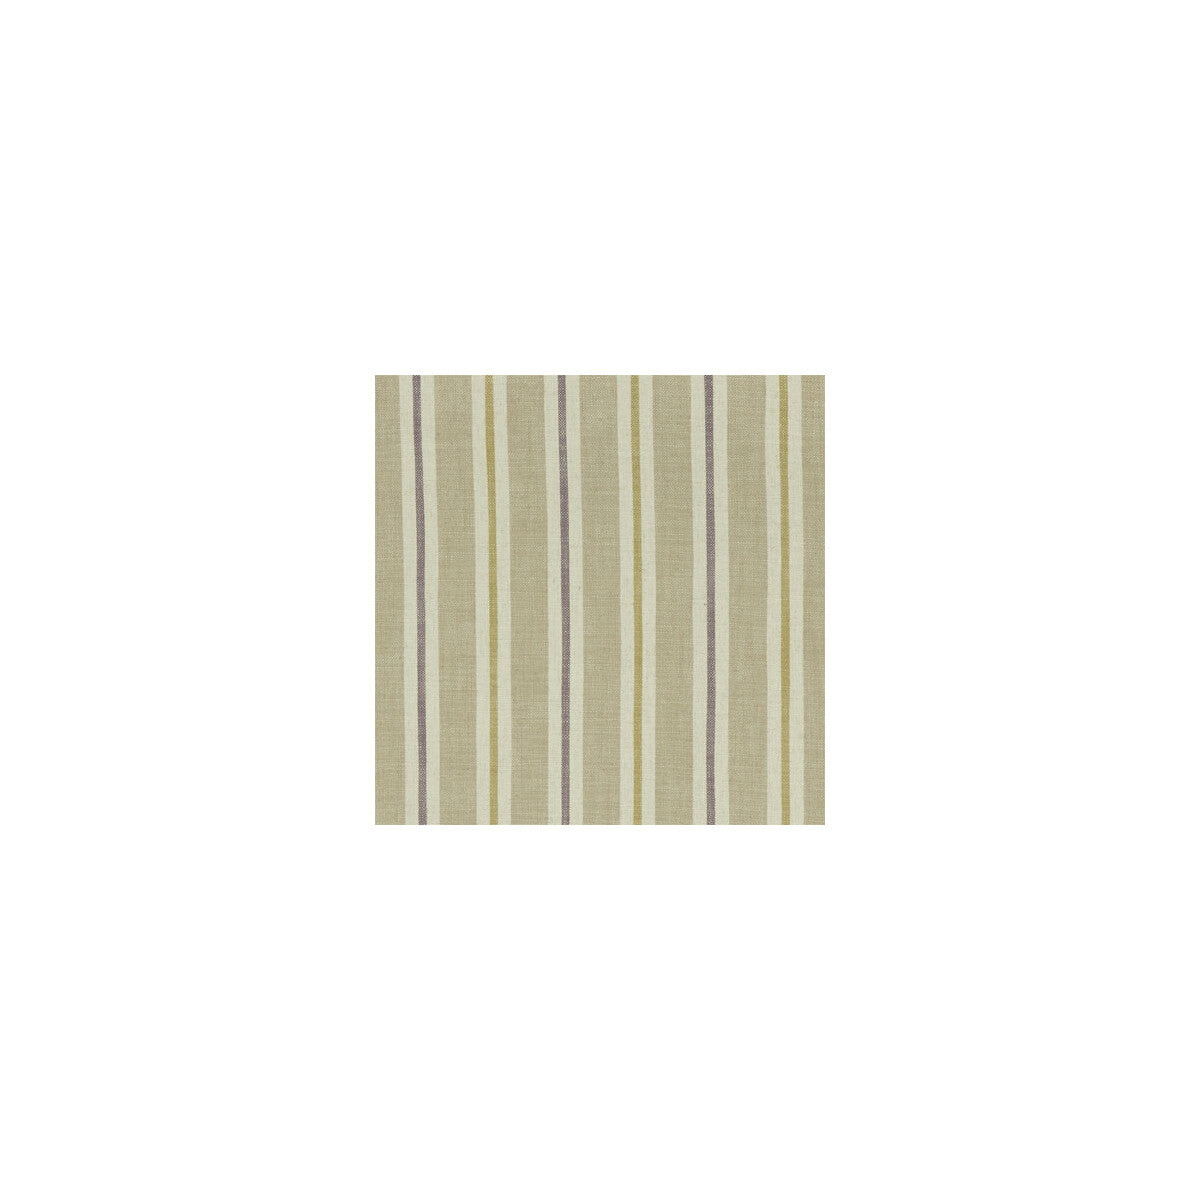 Sackville Stripe fabric in heather/linen color - pattern F1046/03.CAC.0 - by Clarke And Clarke in the Clarke &amp; Clarke Castle Garden collection